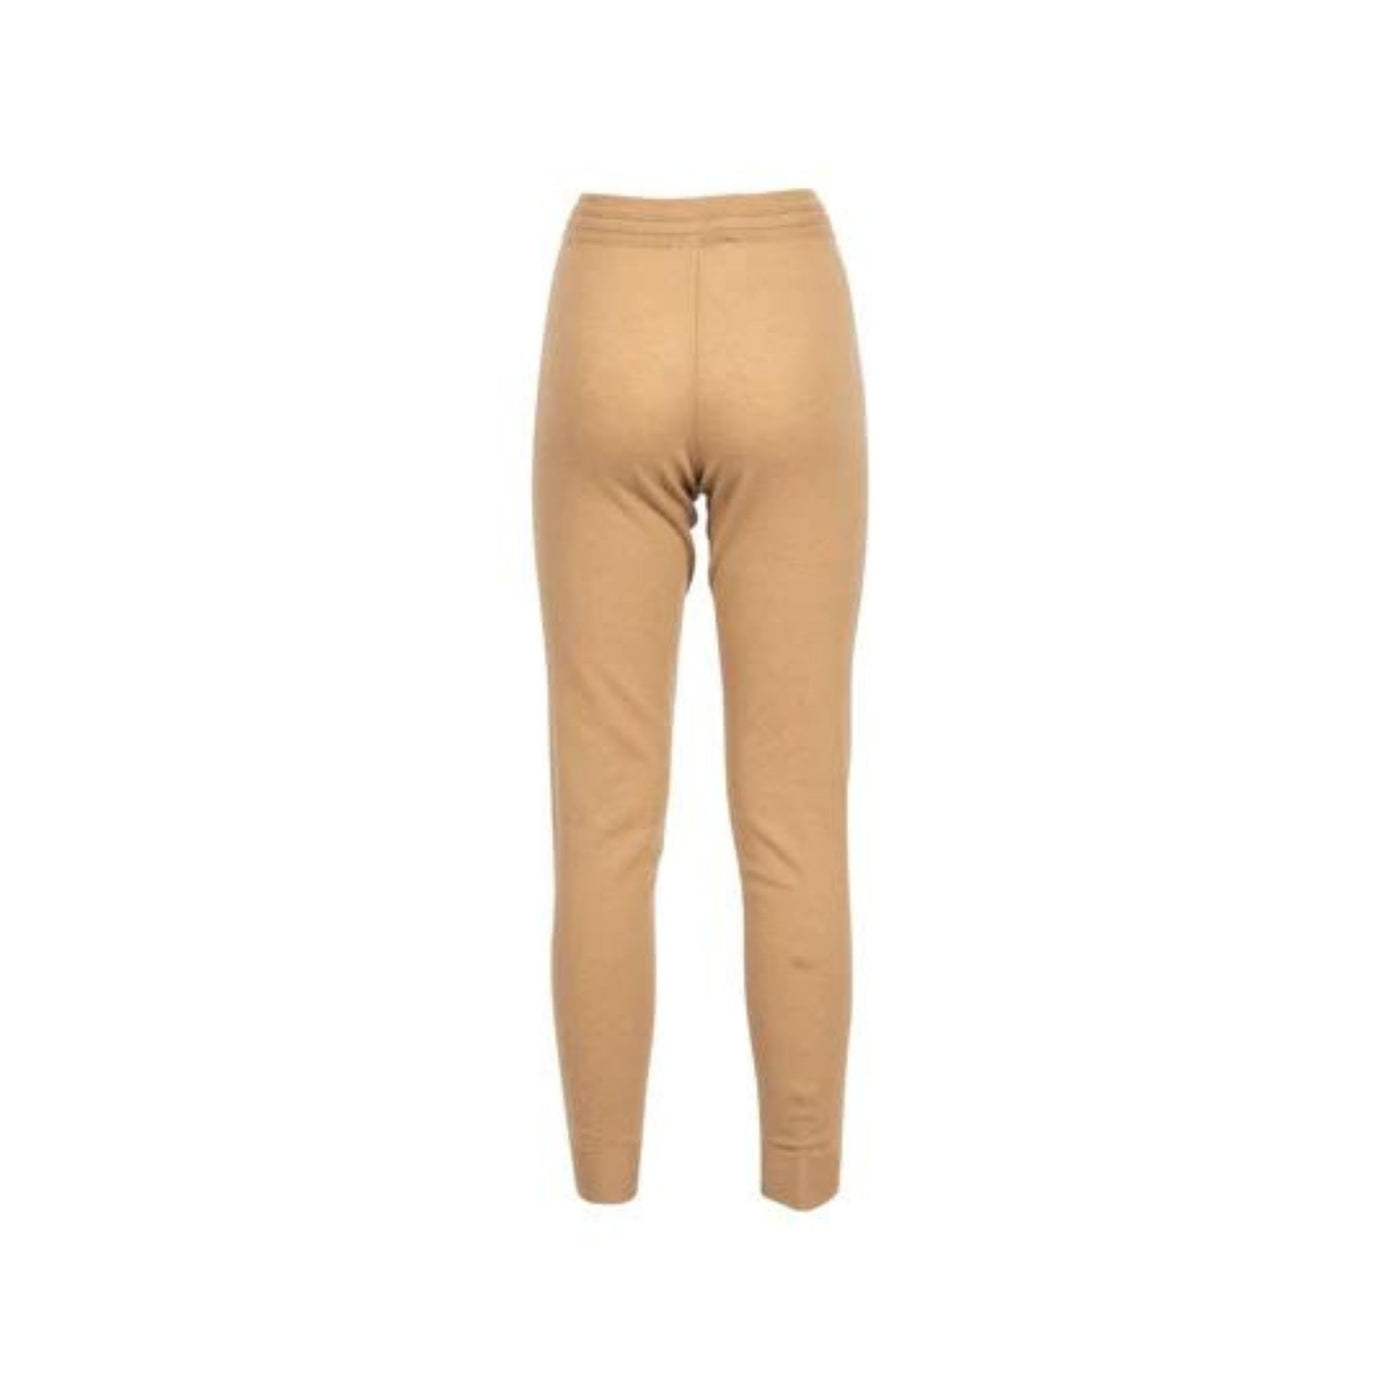 Pantalone Donna con coulisse